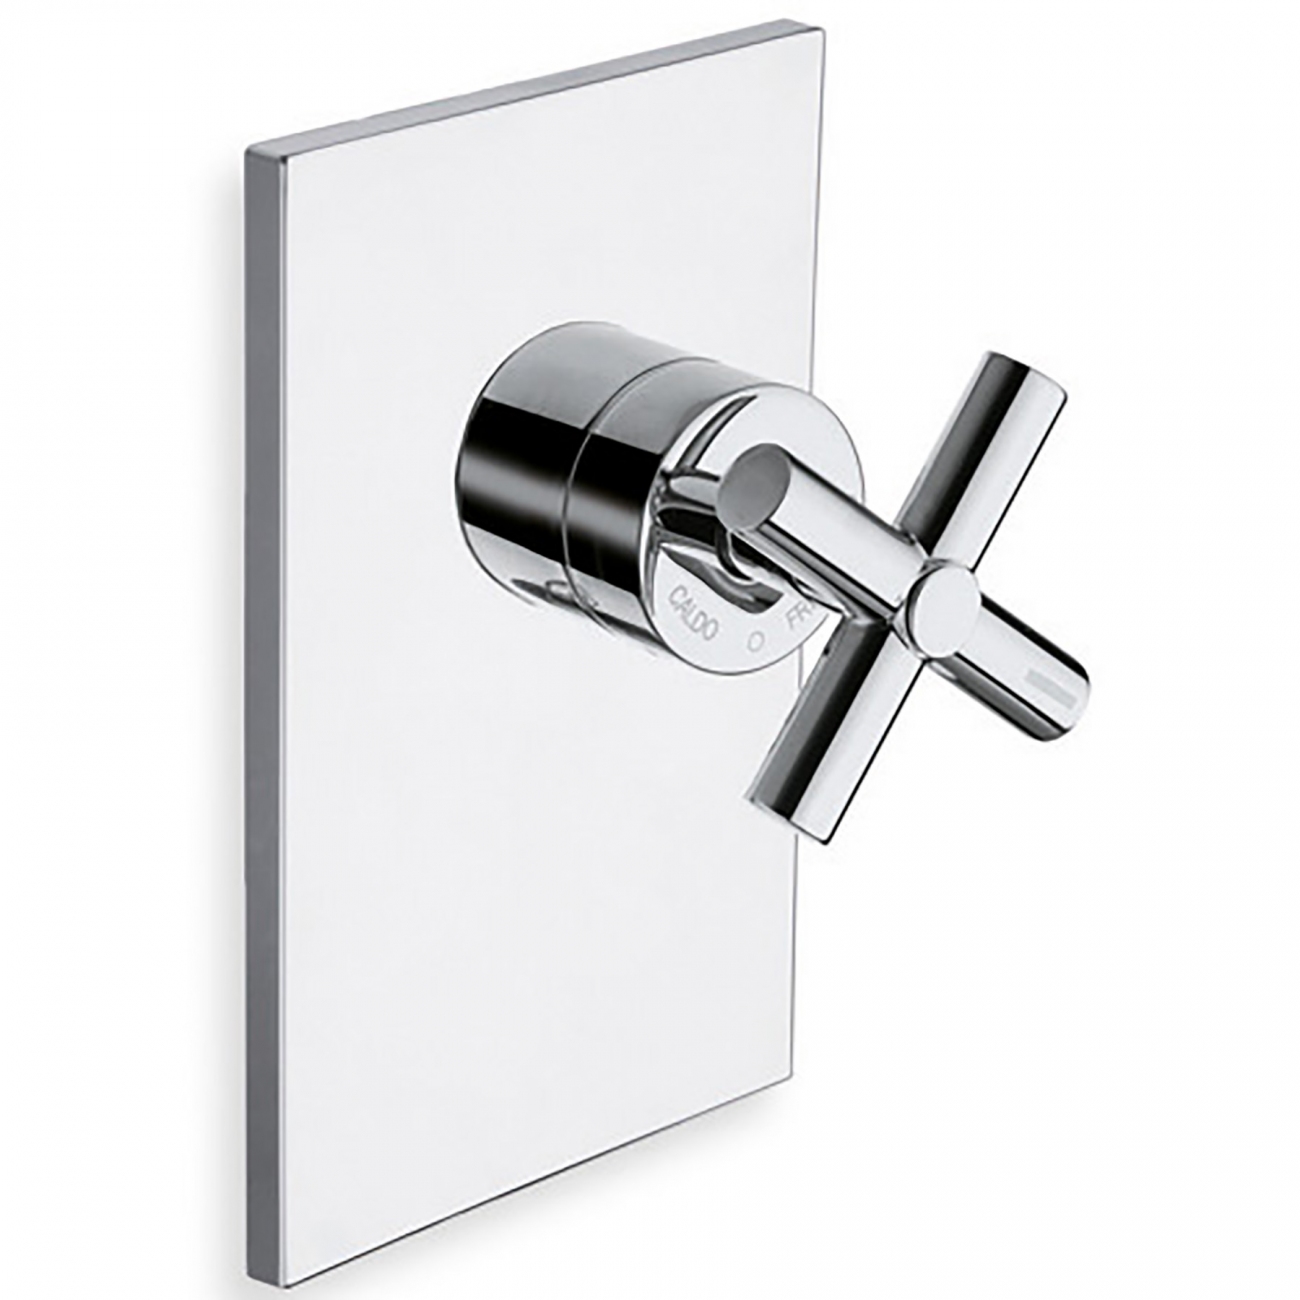 Cristina Contemporary Lines Exclusive Wall Mounted Shower Mixer